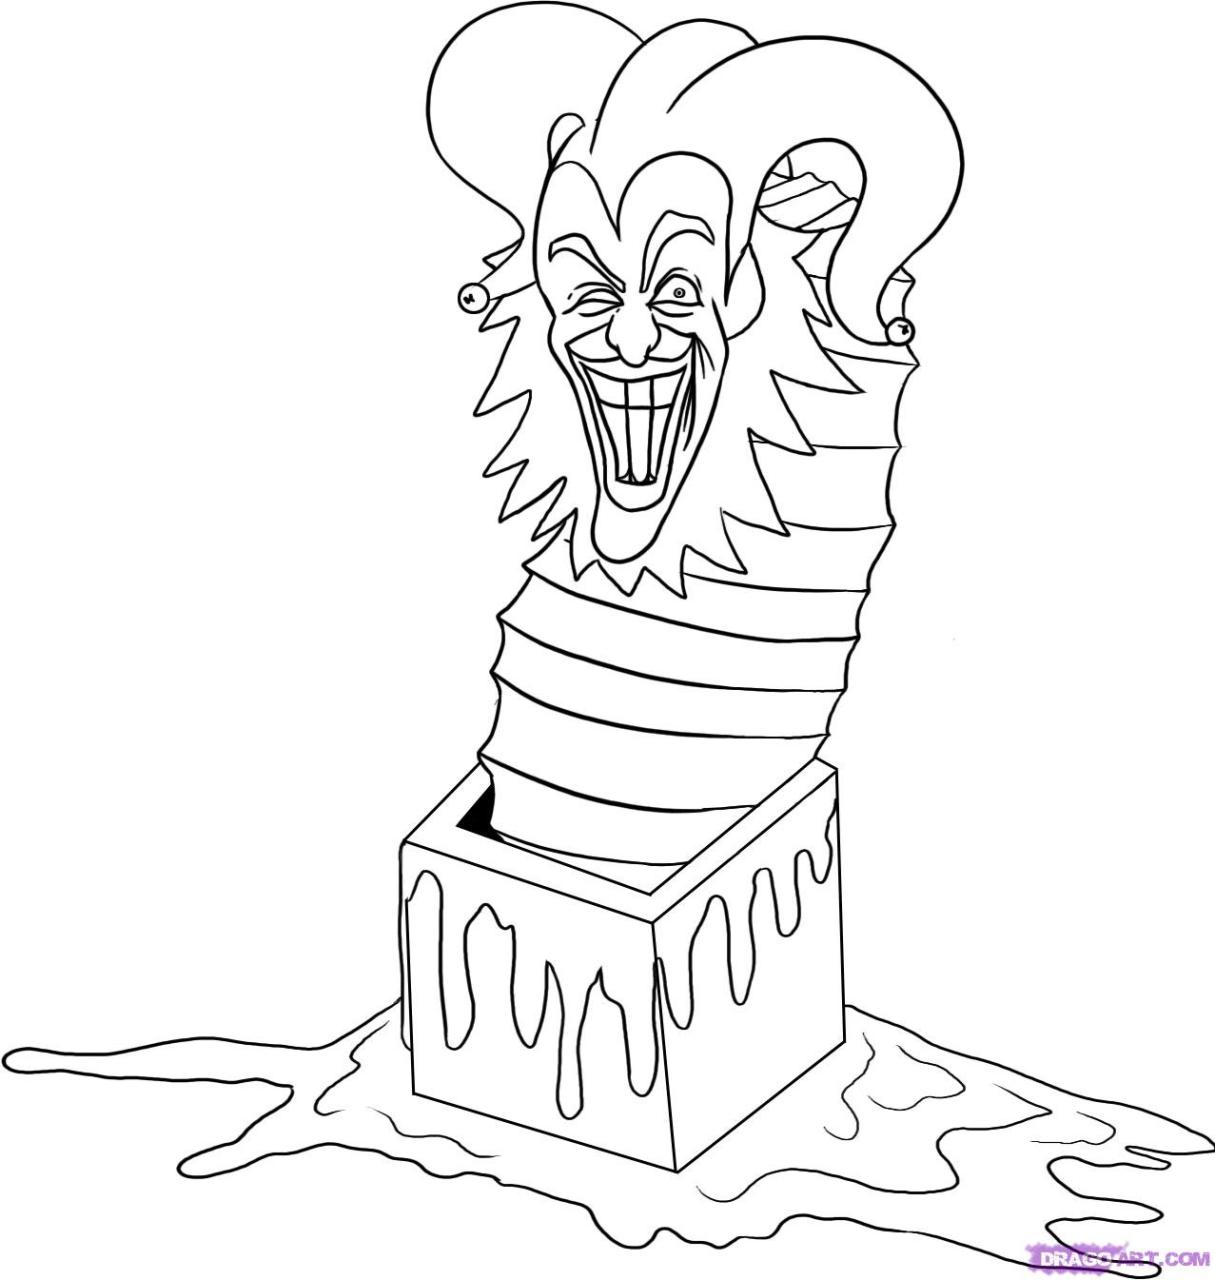 19 Killer Klowns From Outer Space Coloring Pages Printable Coloring Pages